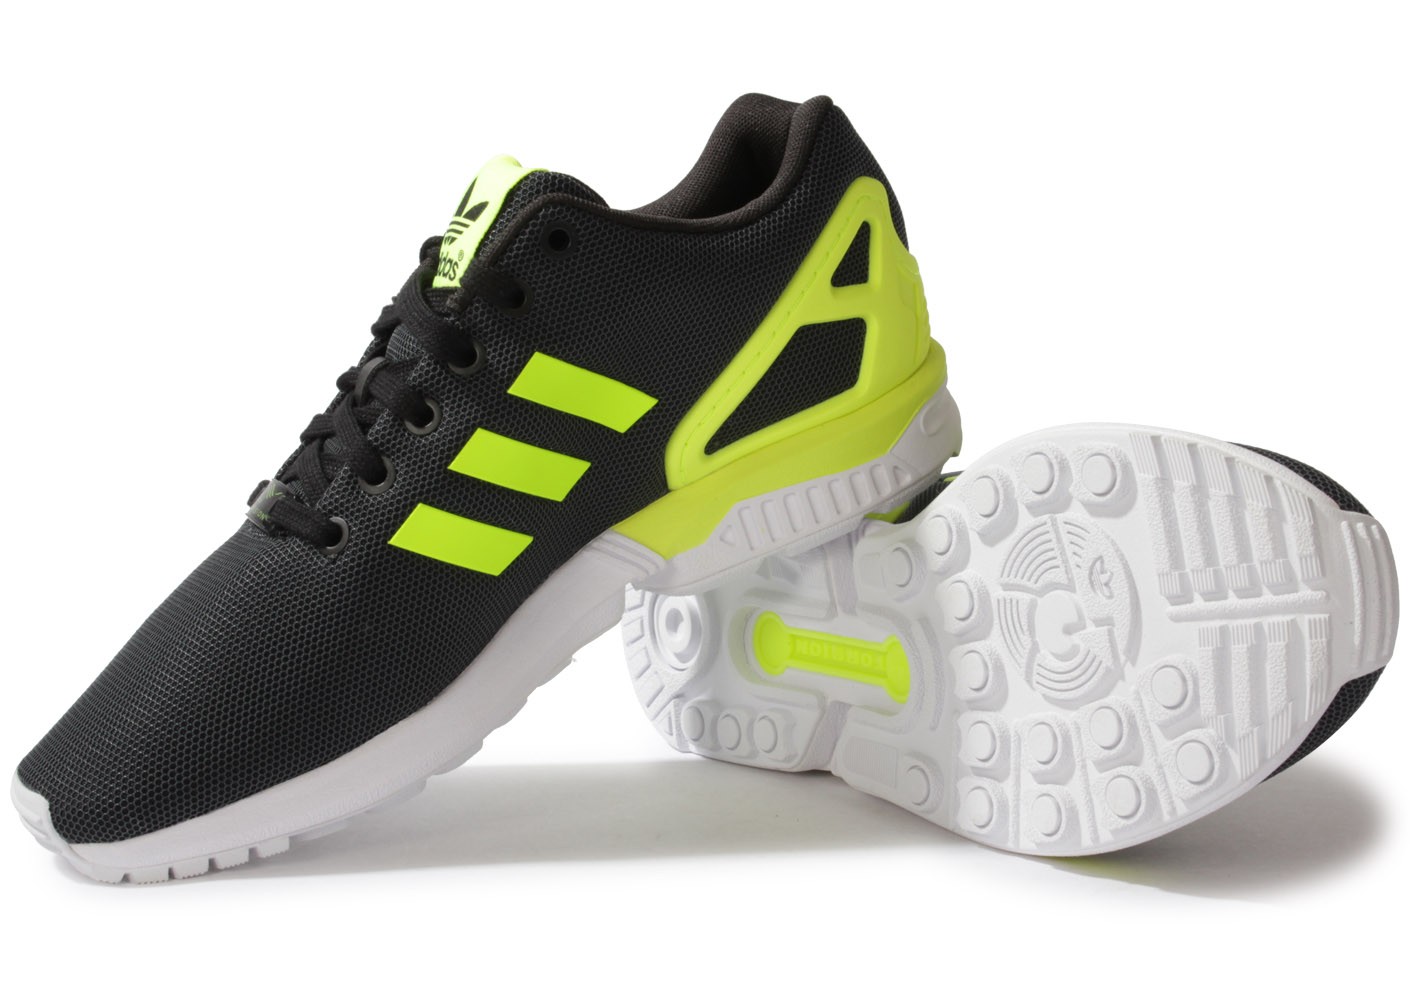 adidas zx flux homme chaussures